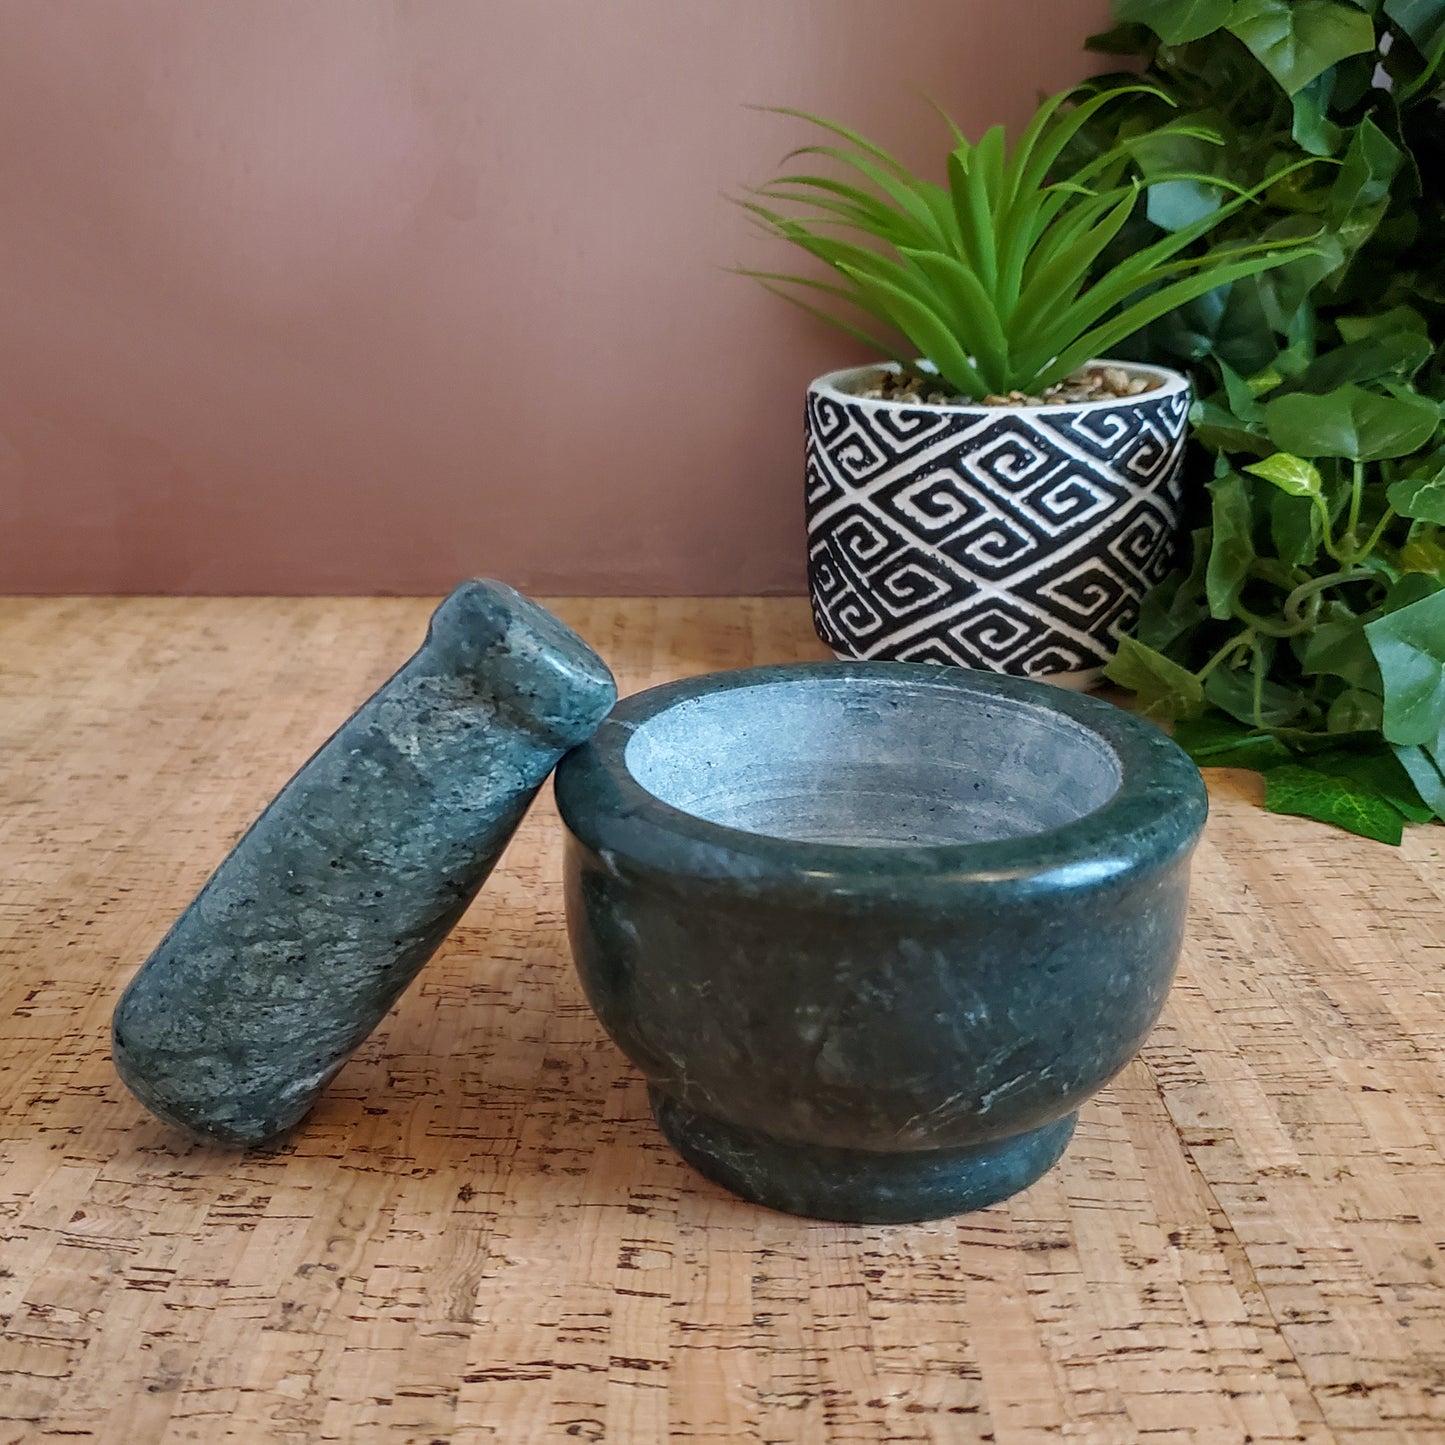 Green Marble Mortar and Pestle - Medium Size - Handmade All Natural Stone 4"